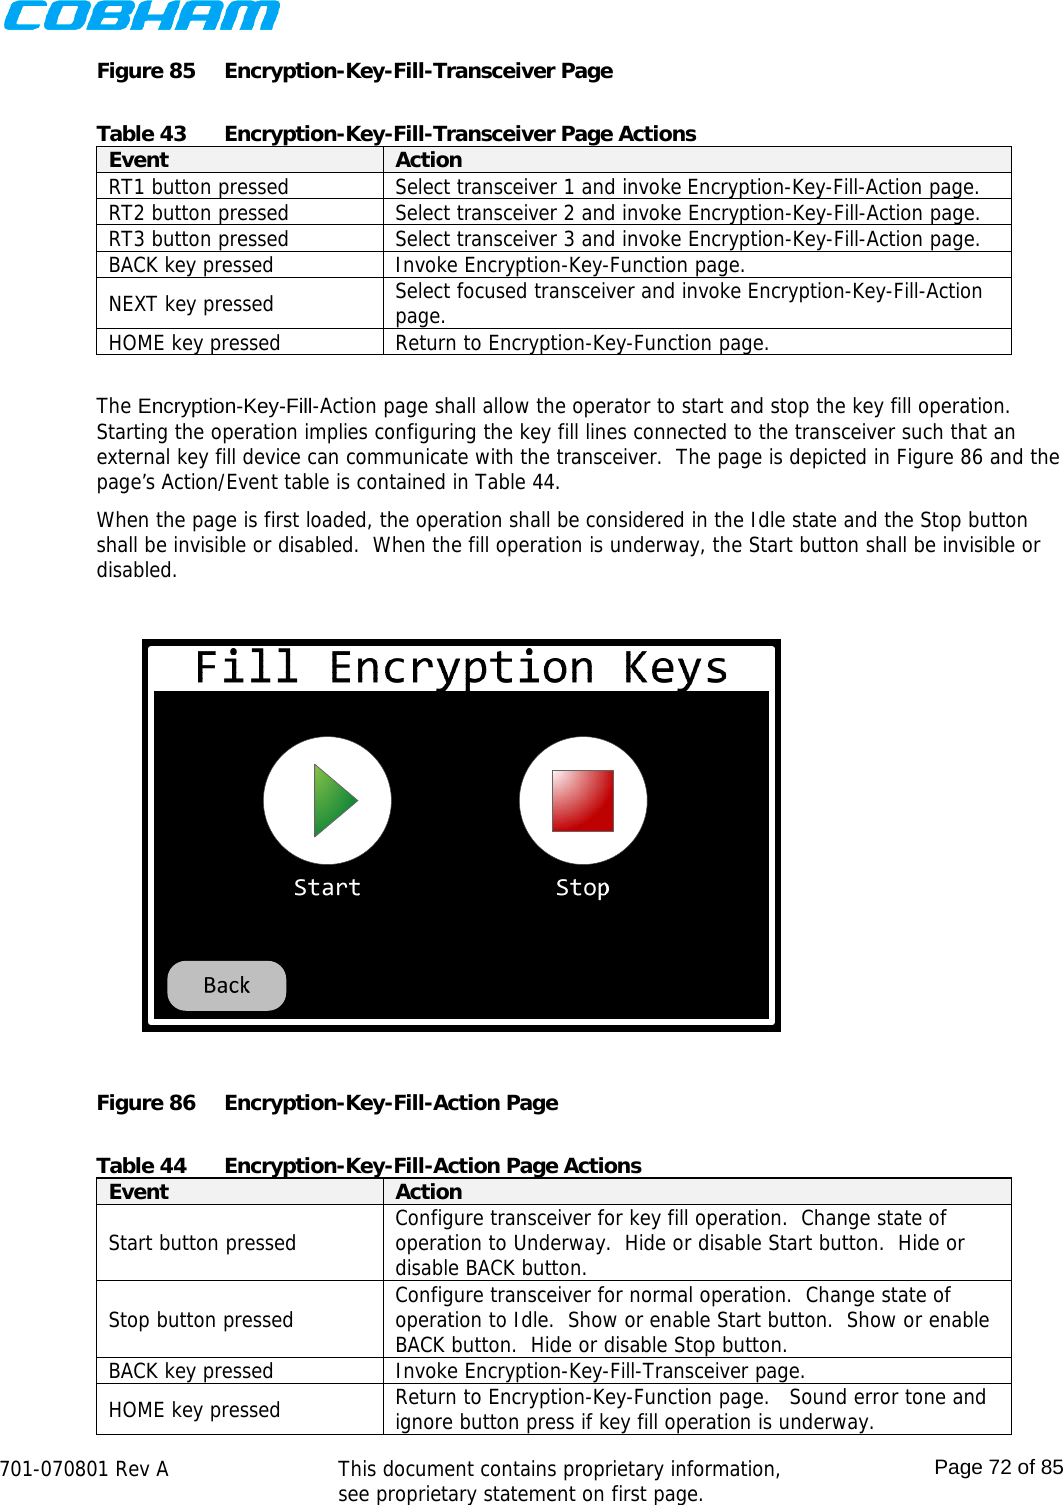    701-070801 Rev A   This document contains proprietary information, see proprietary statement on first page.  Page 72 of 85  Figure 85  Encryption-Key-Fill-Transceiver Page  Table 43  Encryption-Key-Fill-Transceiver Page Actions Event  Action RT1 button pressed  Select transceiver 1 and invoke Encryption-Key-Fill-Action page. RT2 button pressed  Select transceiver 2 and invoke Encryption-Key-Fill-Action page. RT3 button pressed  Select transceiver 3 and invoke Encryption-Key-Fill-Action page. BACK key pressed  Invoke Encryption-Key-Function page. NEXT key pressed  Select focused transceiver and invoke Encryption-Key-Fill-Action page. HOME key pressed  Return to Encryption-Key-Function page.  The Encryption-Key-Fill-Action page shall allow the operator to start and stop the key fill operation.  Starting the operation implies configuring the key fill lines connected to the transceiver such that an external key fill device can communicate with the transceiver.  The page is depicted in Figure 86 and the page’s Action/Event table is contained in Table 44. When the page is first loaded, the operation shall be considered in the Idle state and the Stop button shall be invisible or disabled.  When the fill operation is underway, the Start button shall be invisible or disabled.  Figure 86  Encryption-Key-Fill-Action Page  Table 44  Encryption-Key-Fill-Action Page Actions Event  Action Start button pressed  Configure transceiver for key fill operation.  Change state of operation to Underway.  Hide or disable Start button.  Hide or disable BACK button. Stop button pressed  Configure transceiver for normal operation.  Change state of operation to Idle.  Show or enable Start button.  Show or enable BACK button.  Hide or disable Stop button. BACK key pressed  Invoke Encryption-Key-Fill-Transceiver page. HOME key pressed  Return to Encryption-Key-Function page.   Sound error tone and ignore button press if key fill operation is underway. 